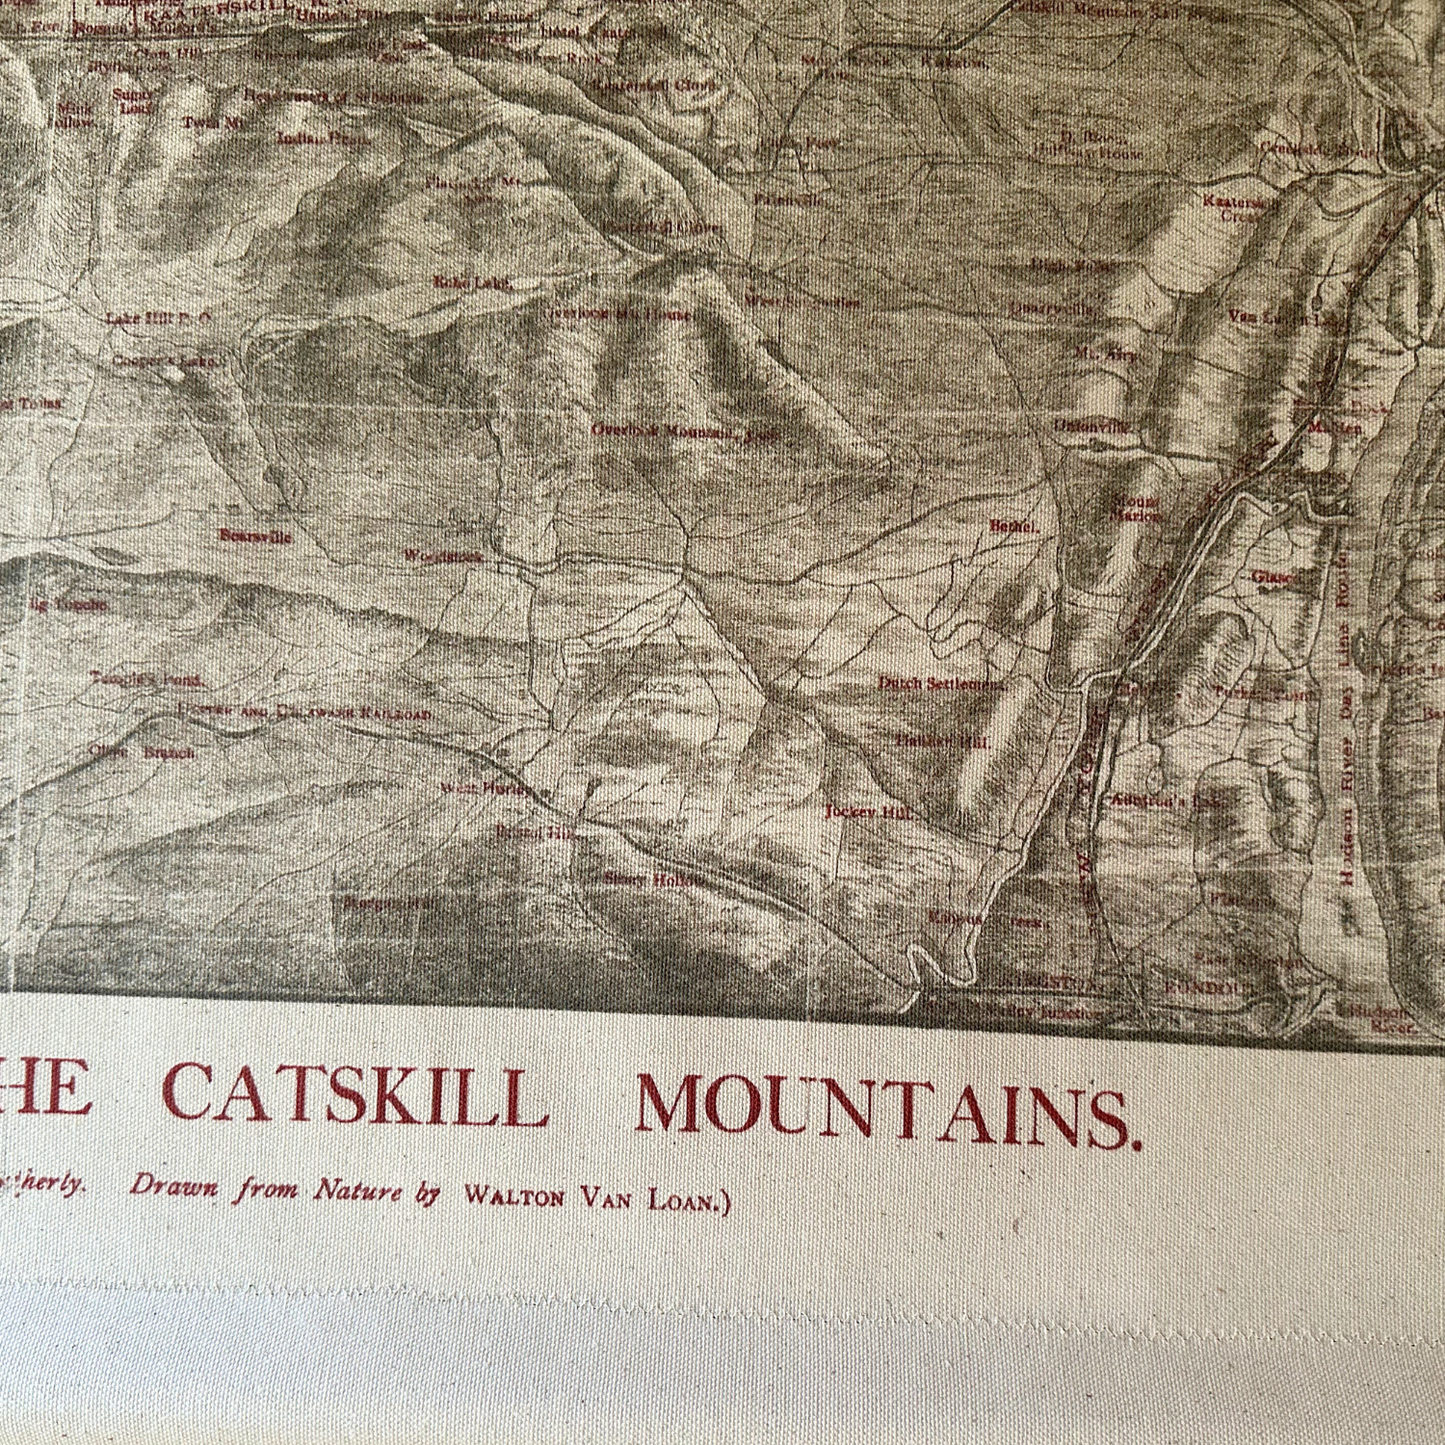 Canvas Wall Hanging - Birds-Eye View of the Catskill Mountains